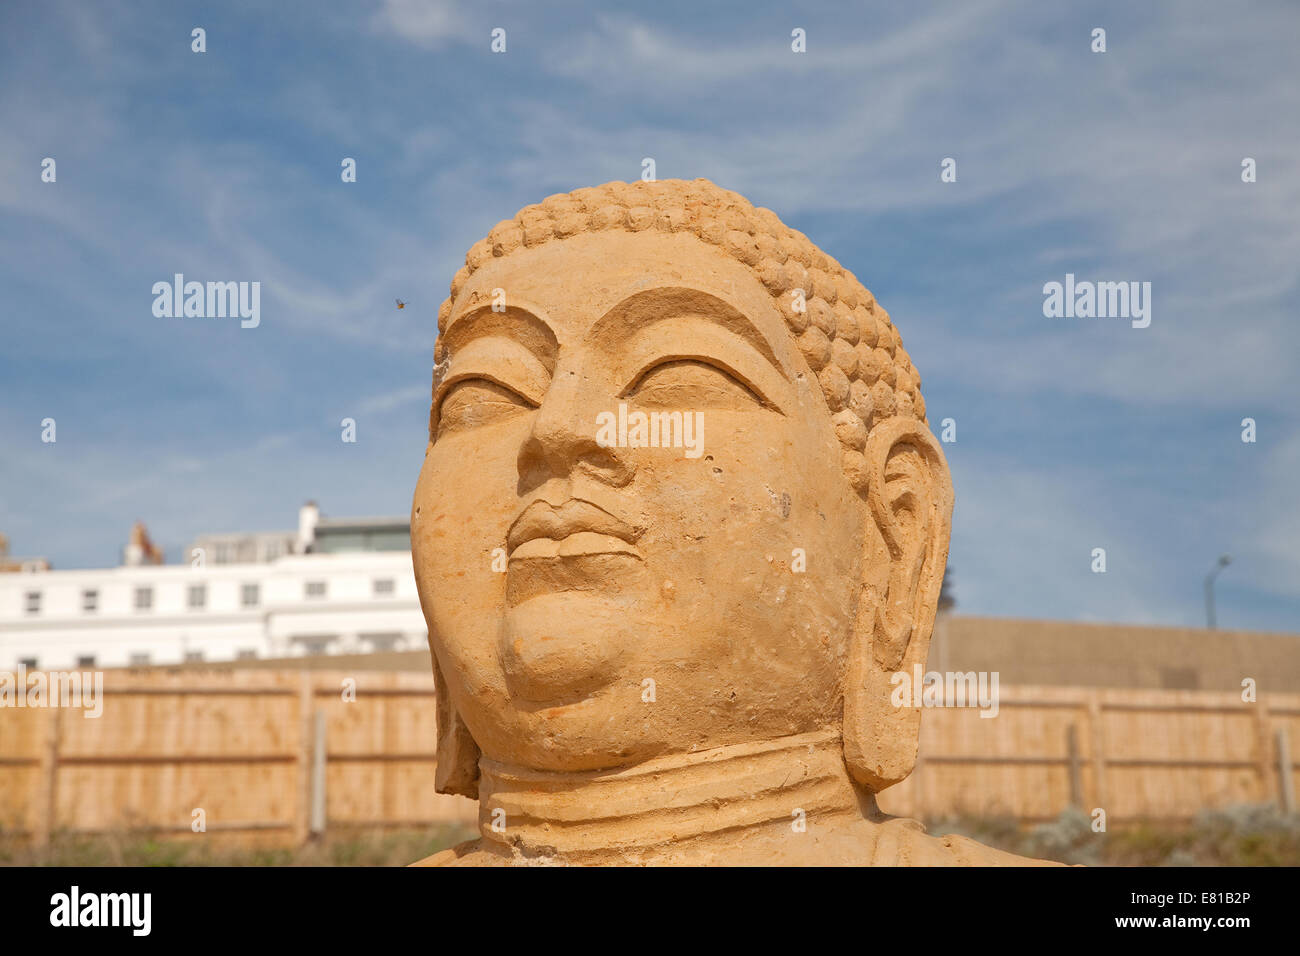 The head of the Tian Tan Buddha from China on display at the Sand Sculpture festival in Brighton Stock Photo